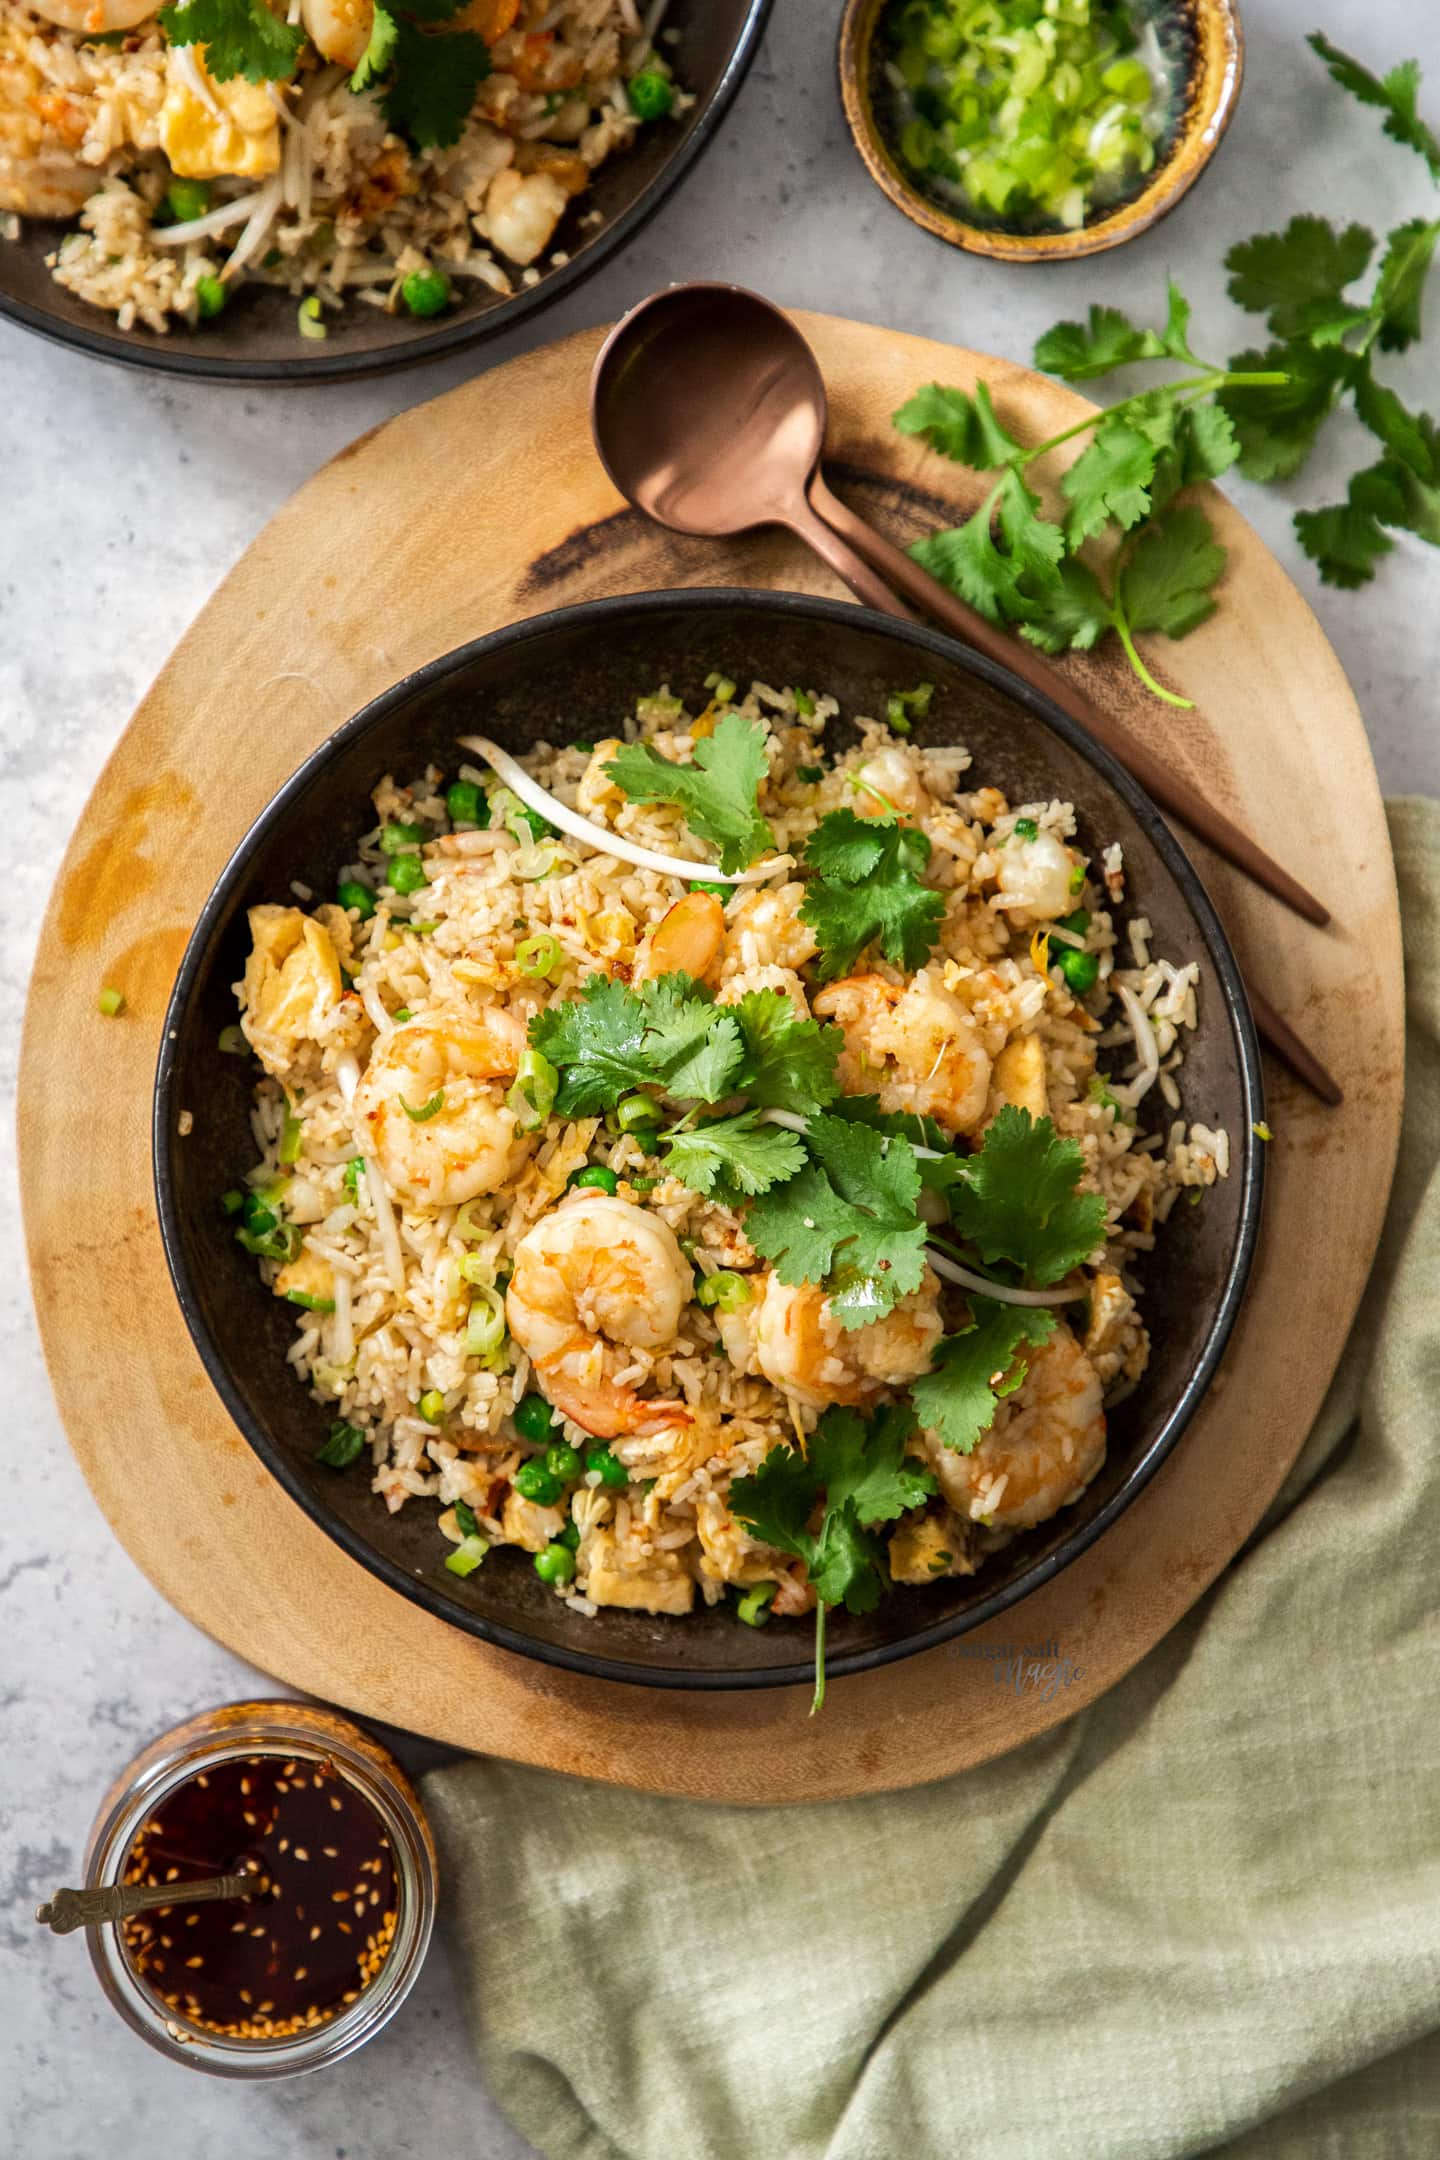 Top down view of a bowl of prawn fried rice on a wooden platter with spoons.